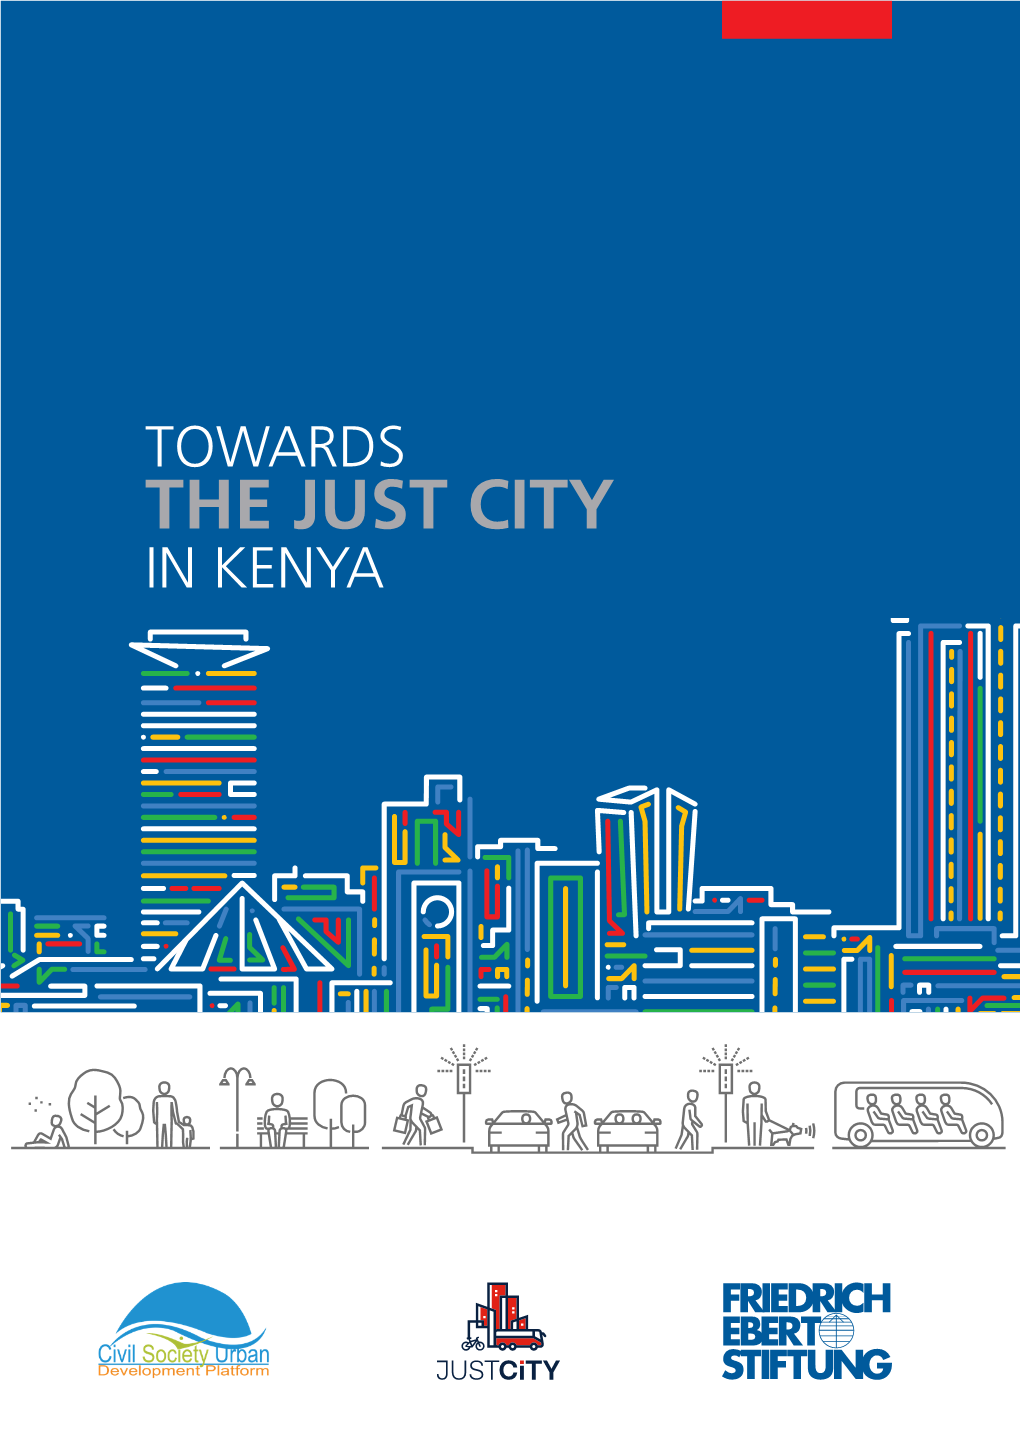 The Just City in Kenya